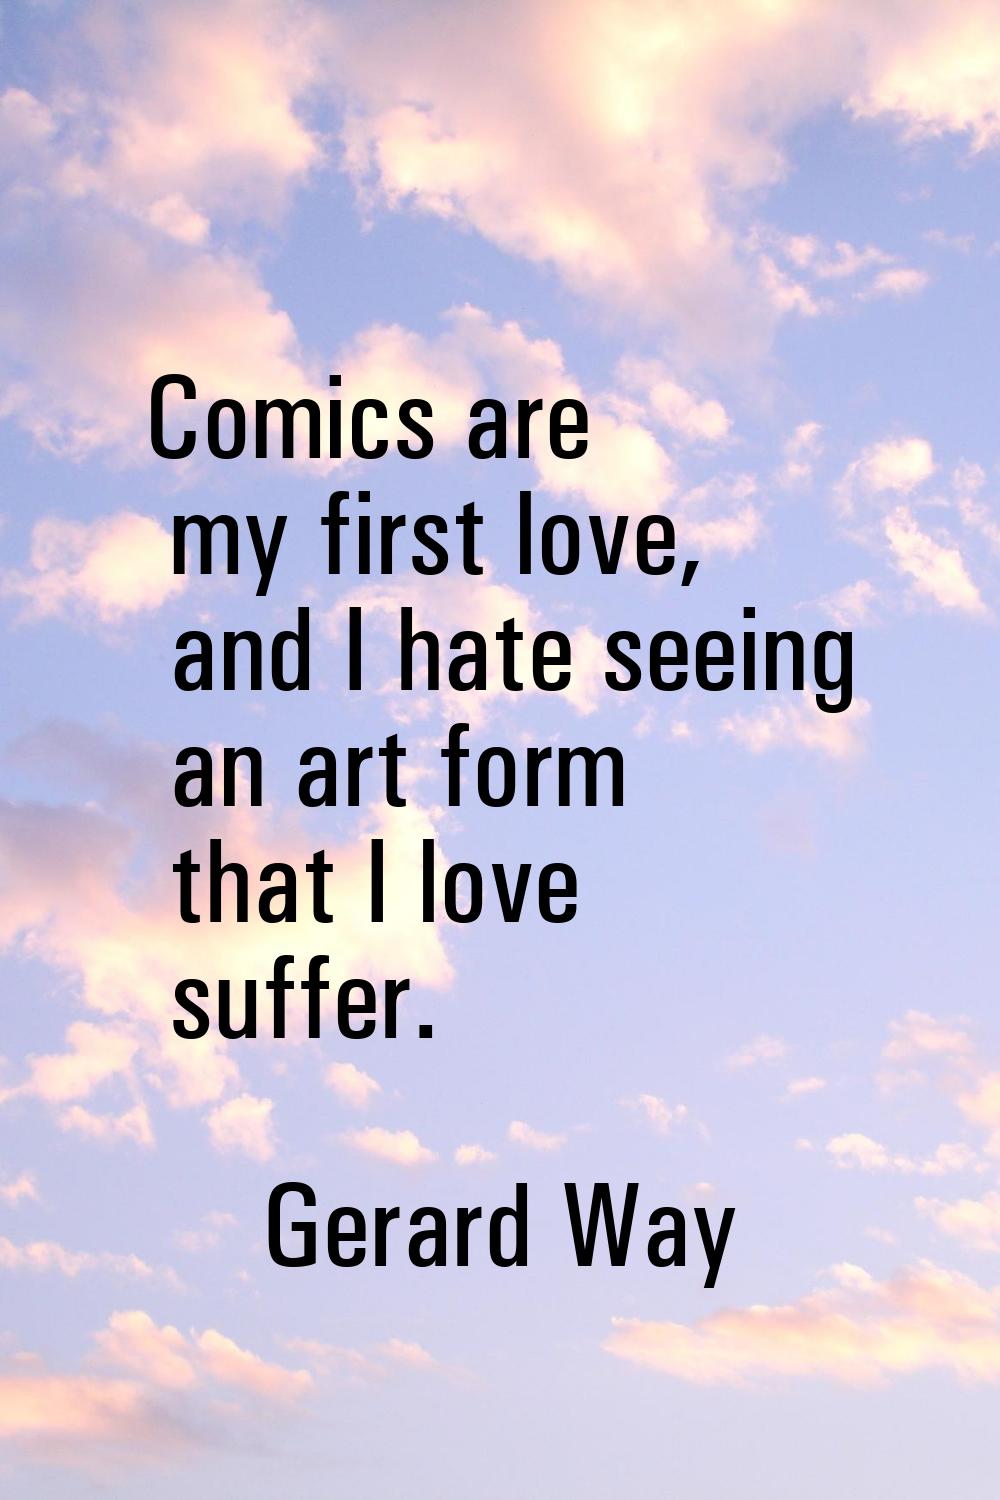 Comics are my first love, and I hate seeing an art form that I love suffer.